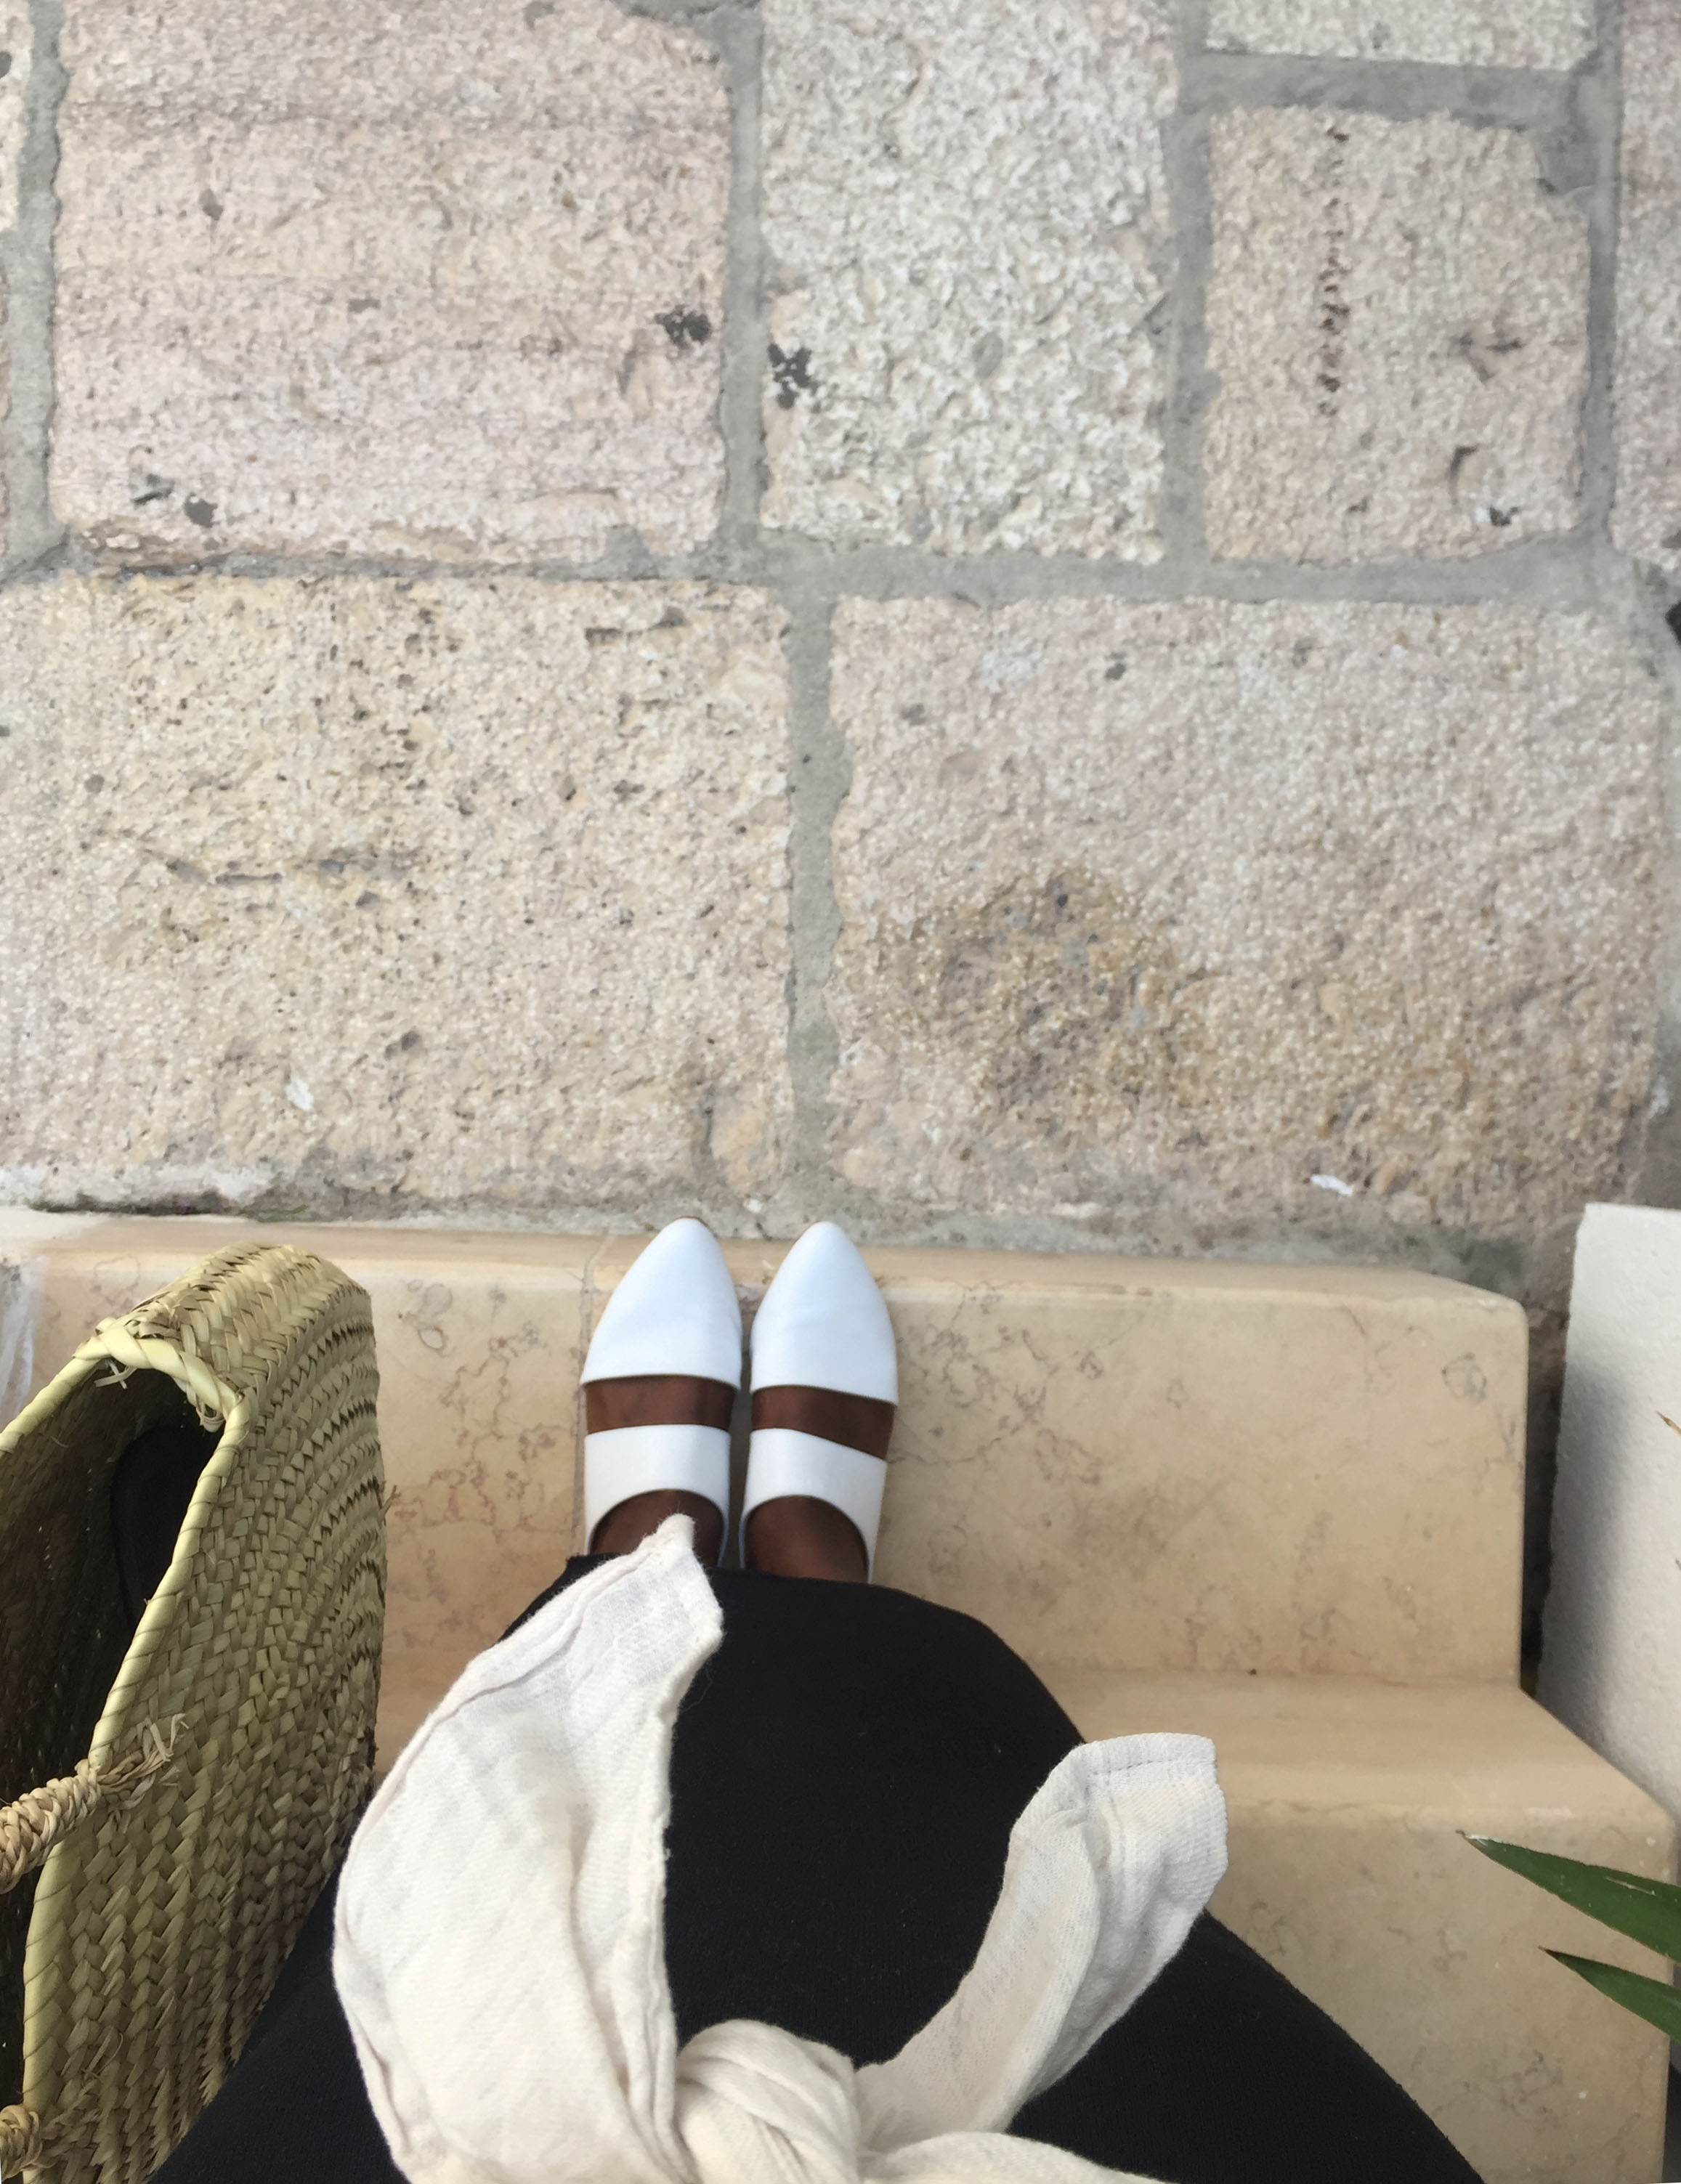 katherine of zou xou wearing the mule in white